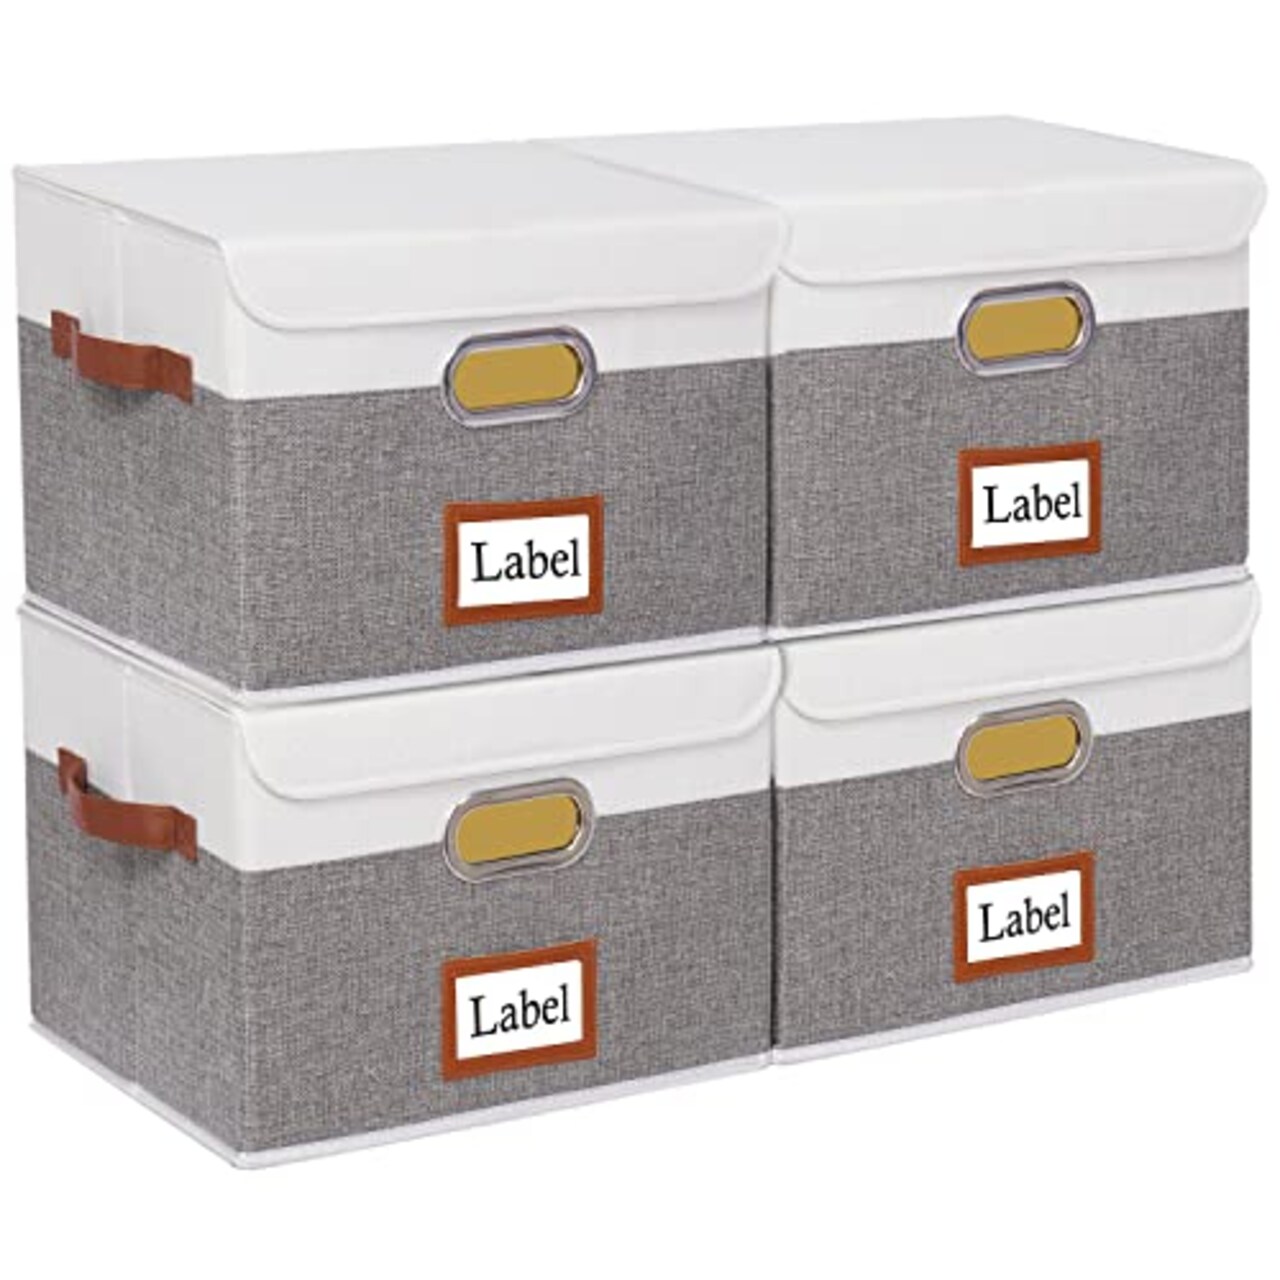 Yawinhe 4-Pack Storage Boxes with Lids, Storage Baskets Cubes,  13x9x7.9Inch, Fabric Storage Bins Organizer Containers with Dual Leather  Handles for Home Bedroom Closet Office White/Grey